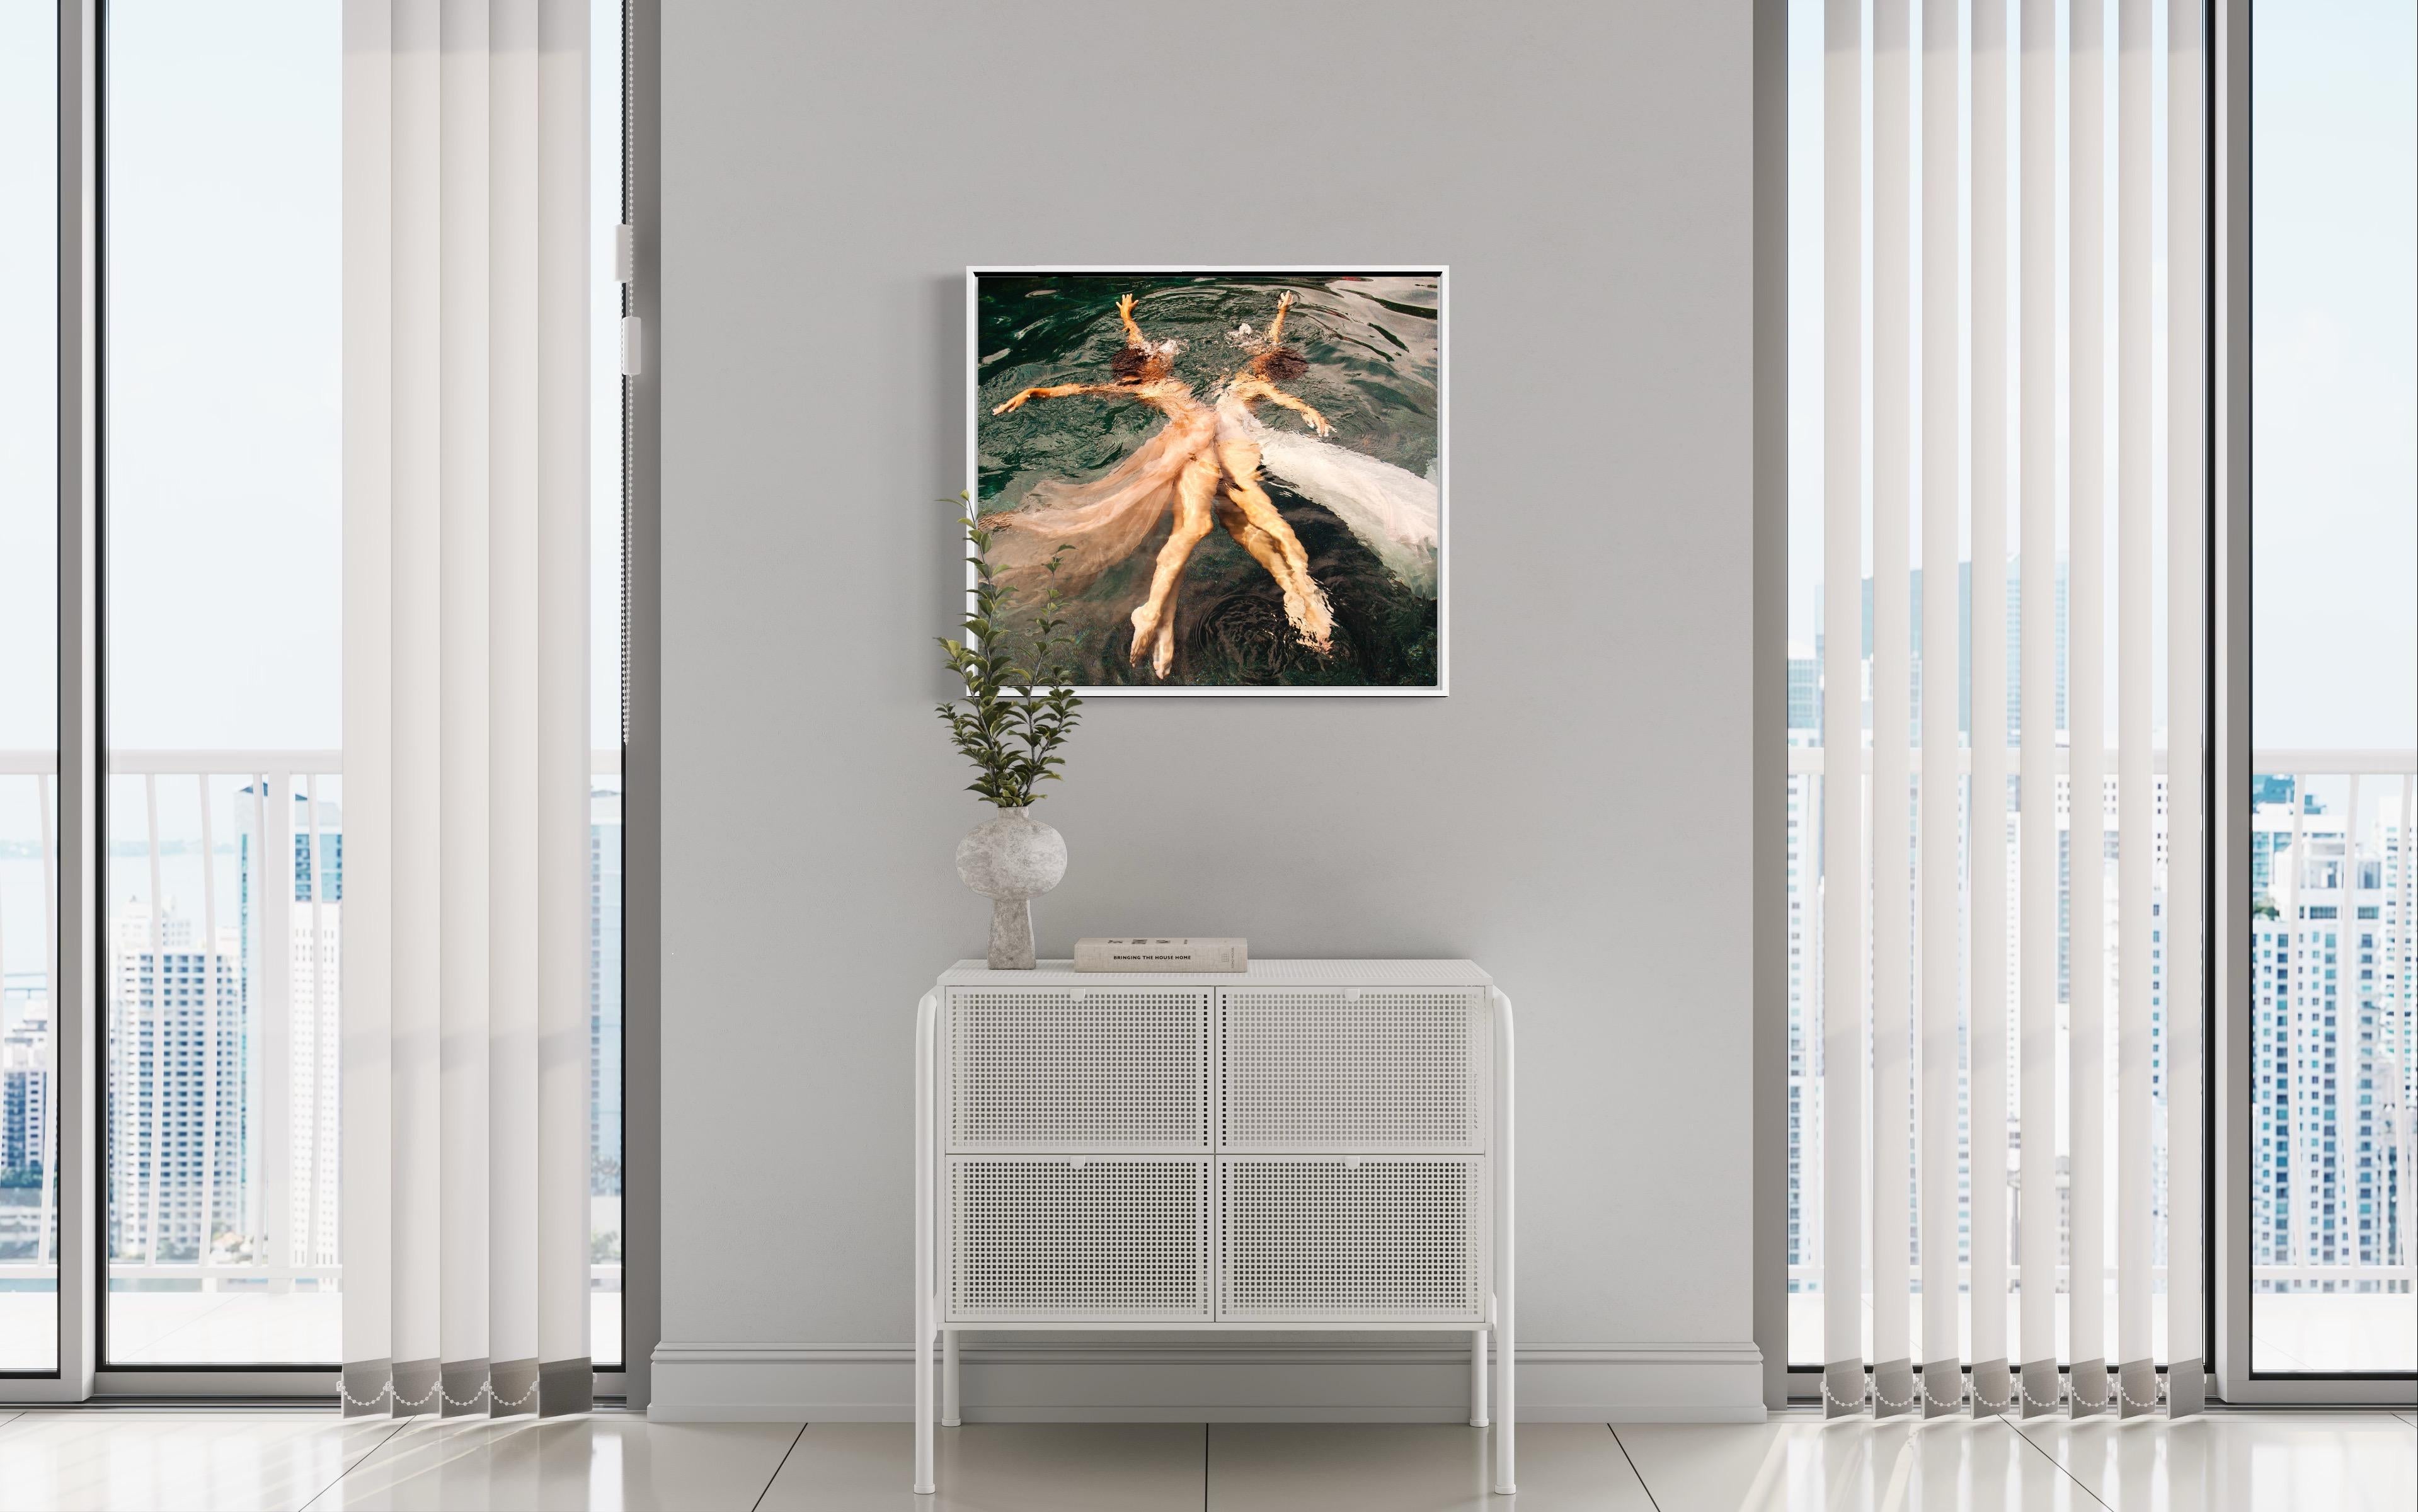 This contemporary figural limited edition photograph by Alyssa Fortin features a view from above the surface of water, with two female figures posed in dancer-like poses. Facing one another, they extend their arms and legs with blush and white